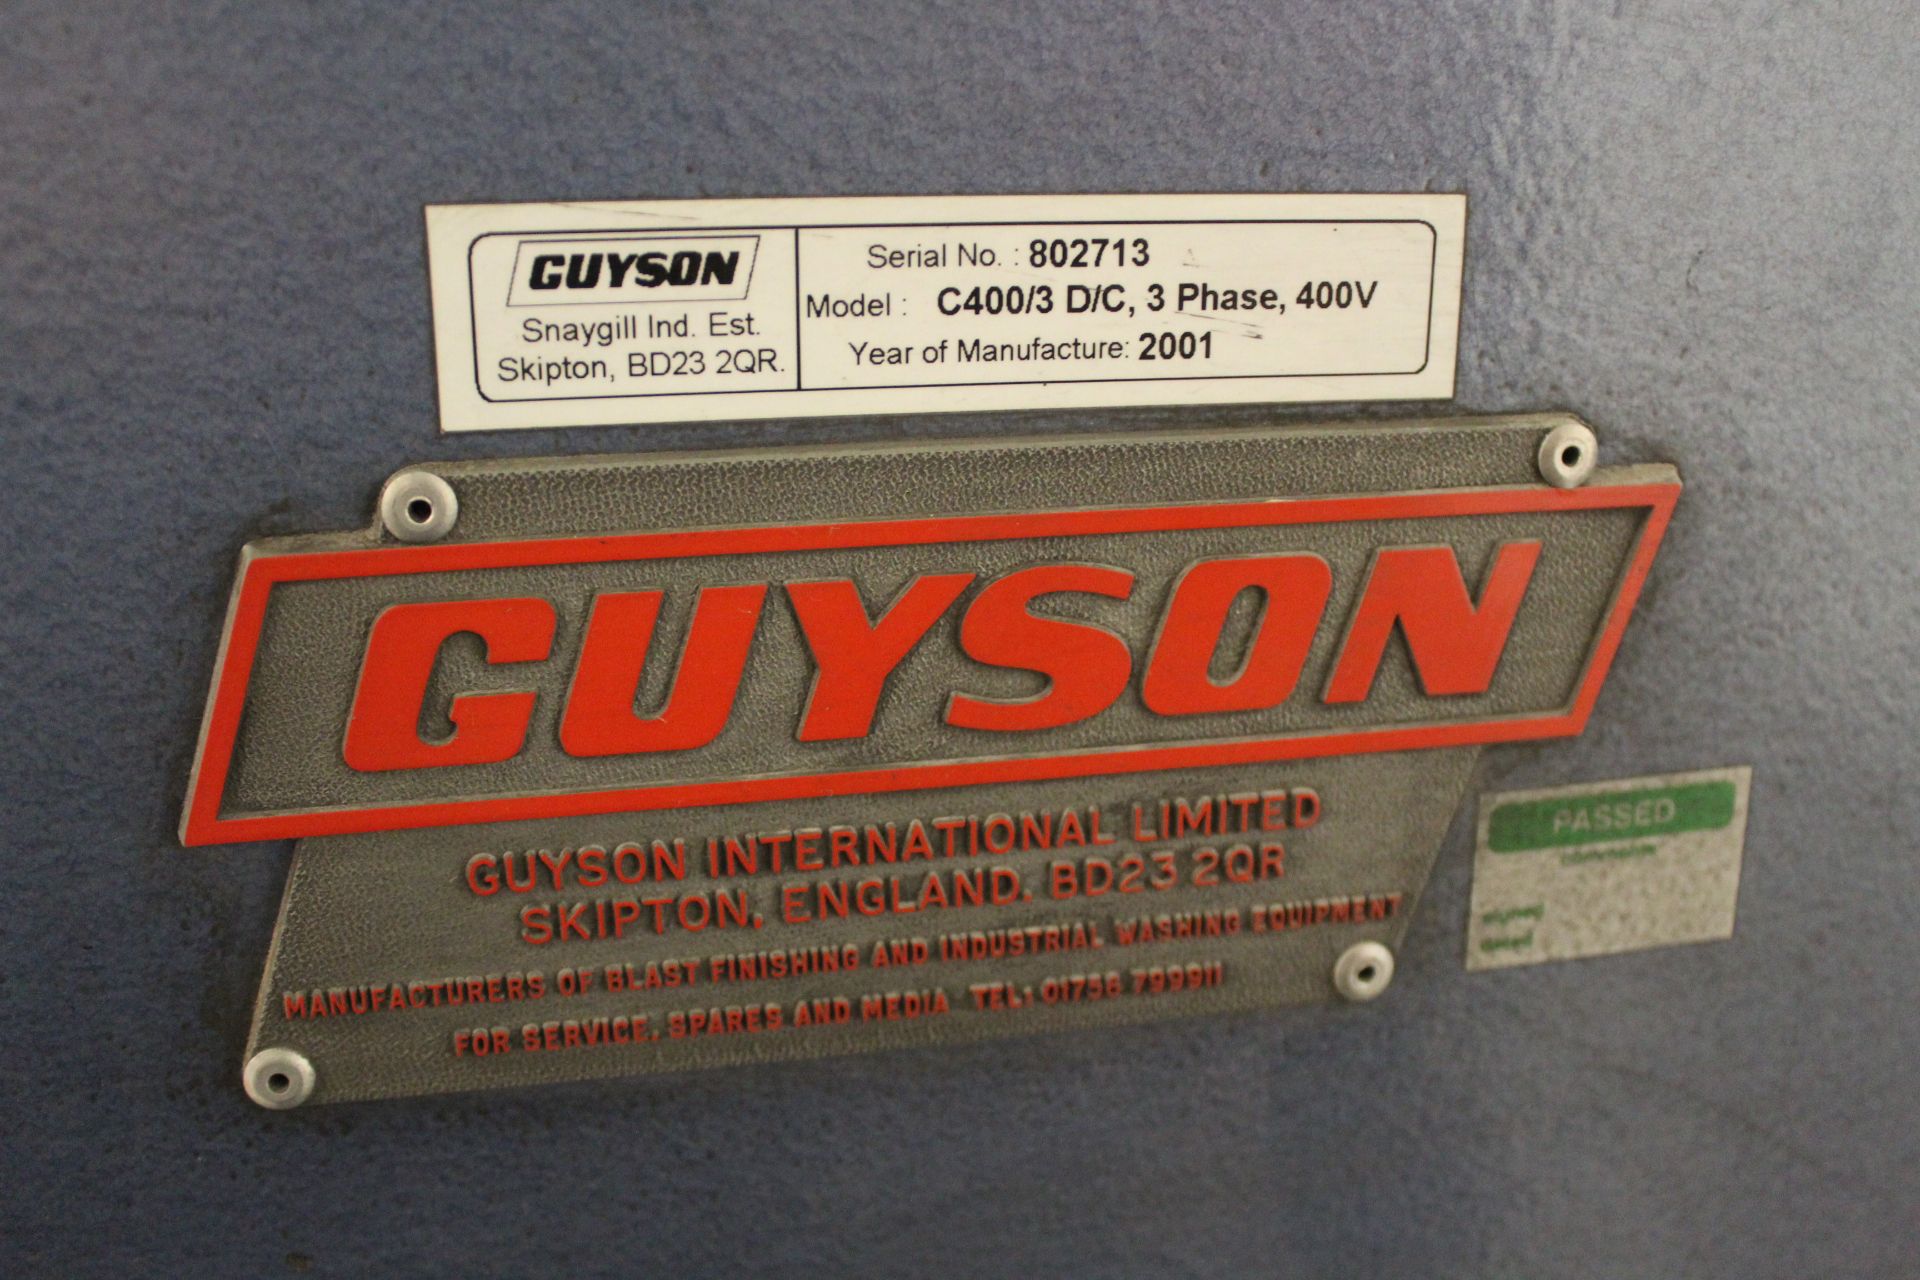 Guyson Euro 6 SF Plus System shot blast cabinet, Serial No. 802713 (2001), size: 1,070mm x 778mm x - Image 7 of 7